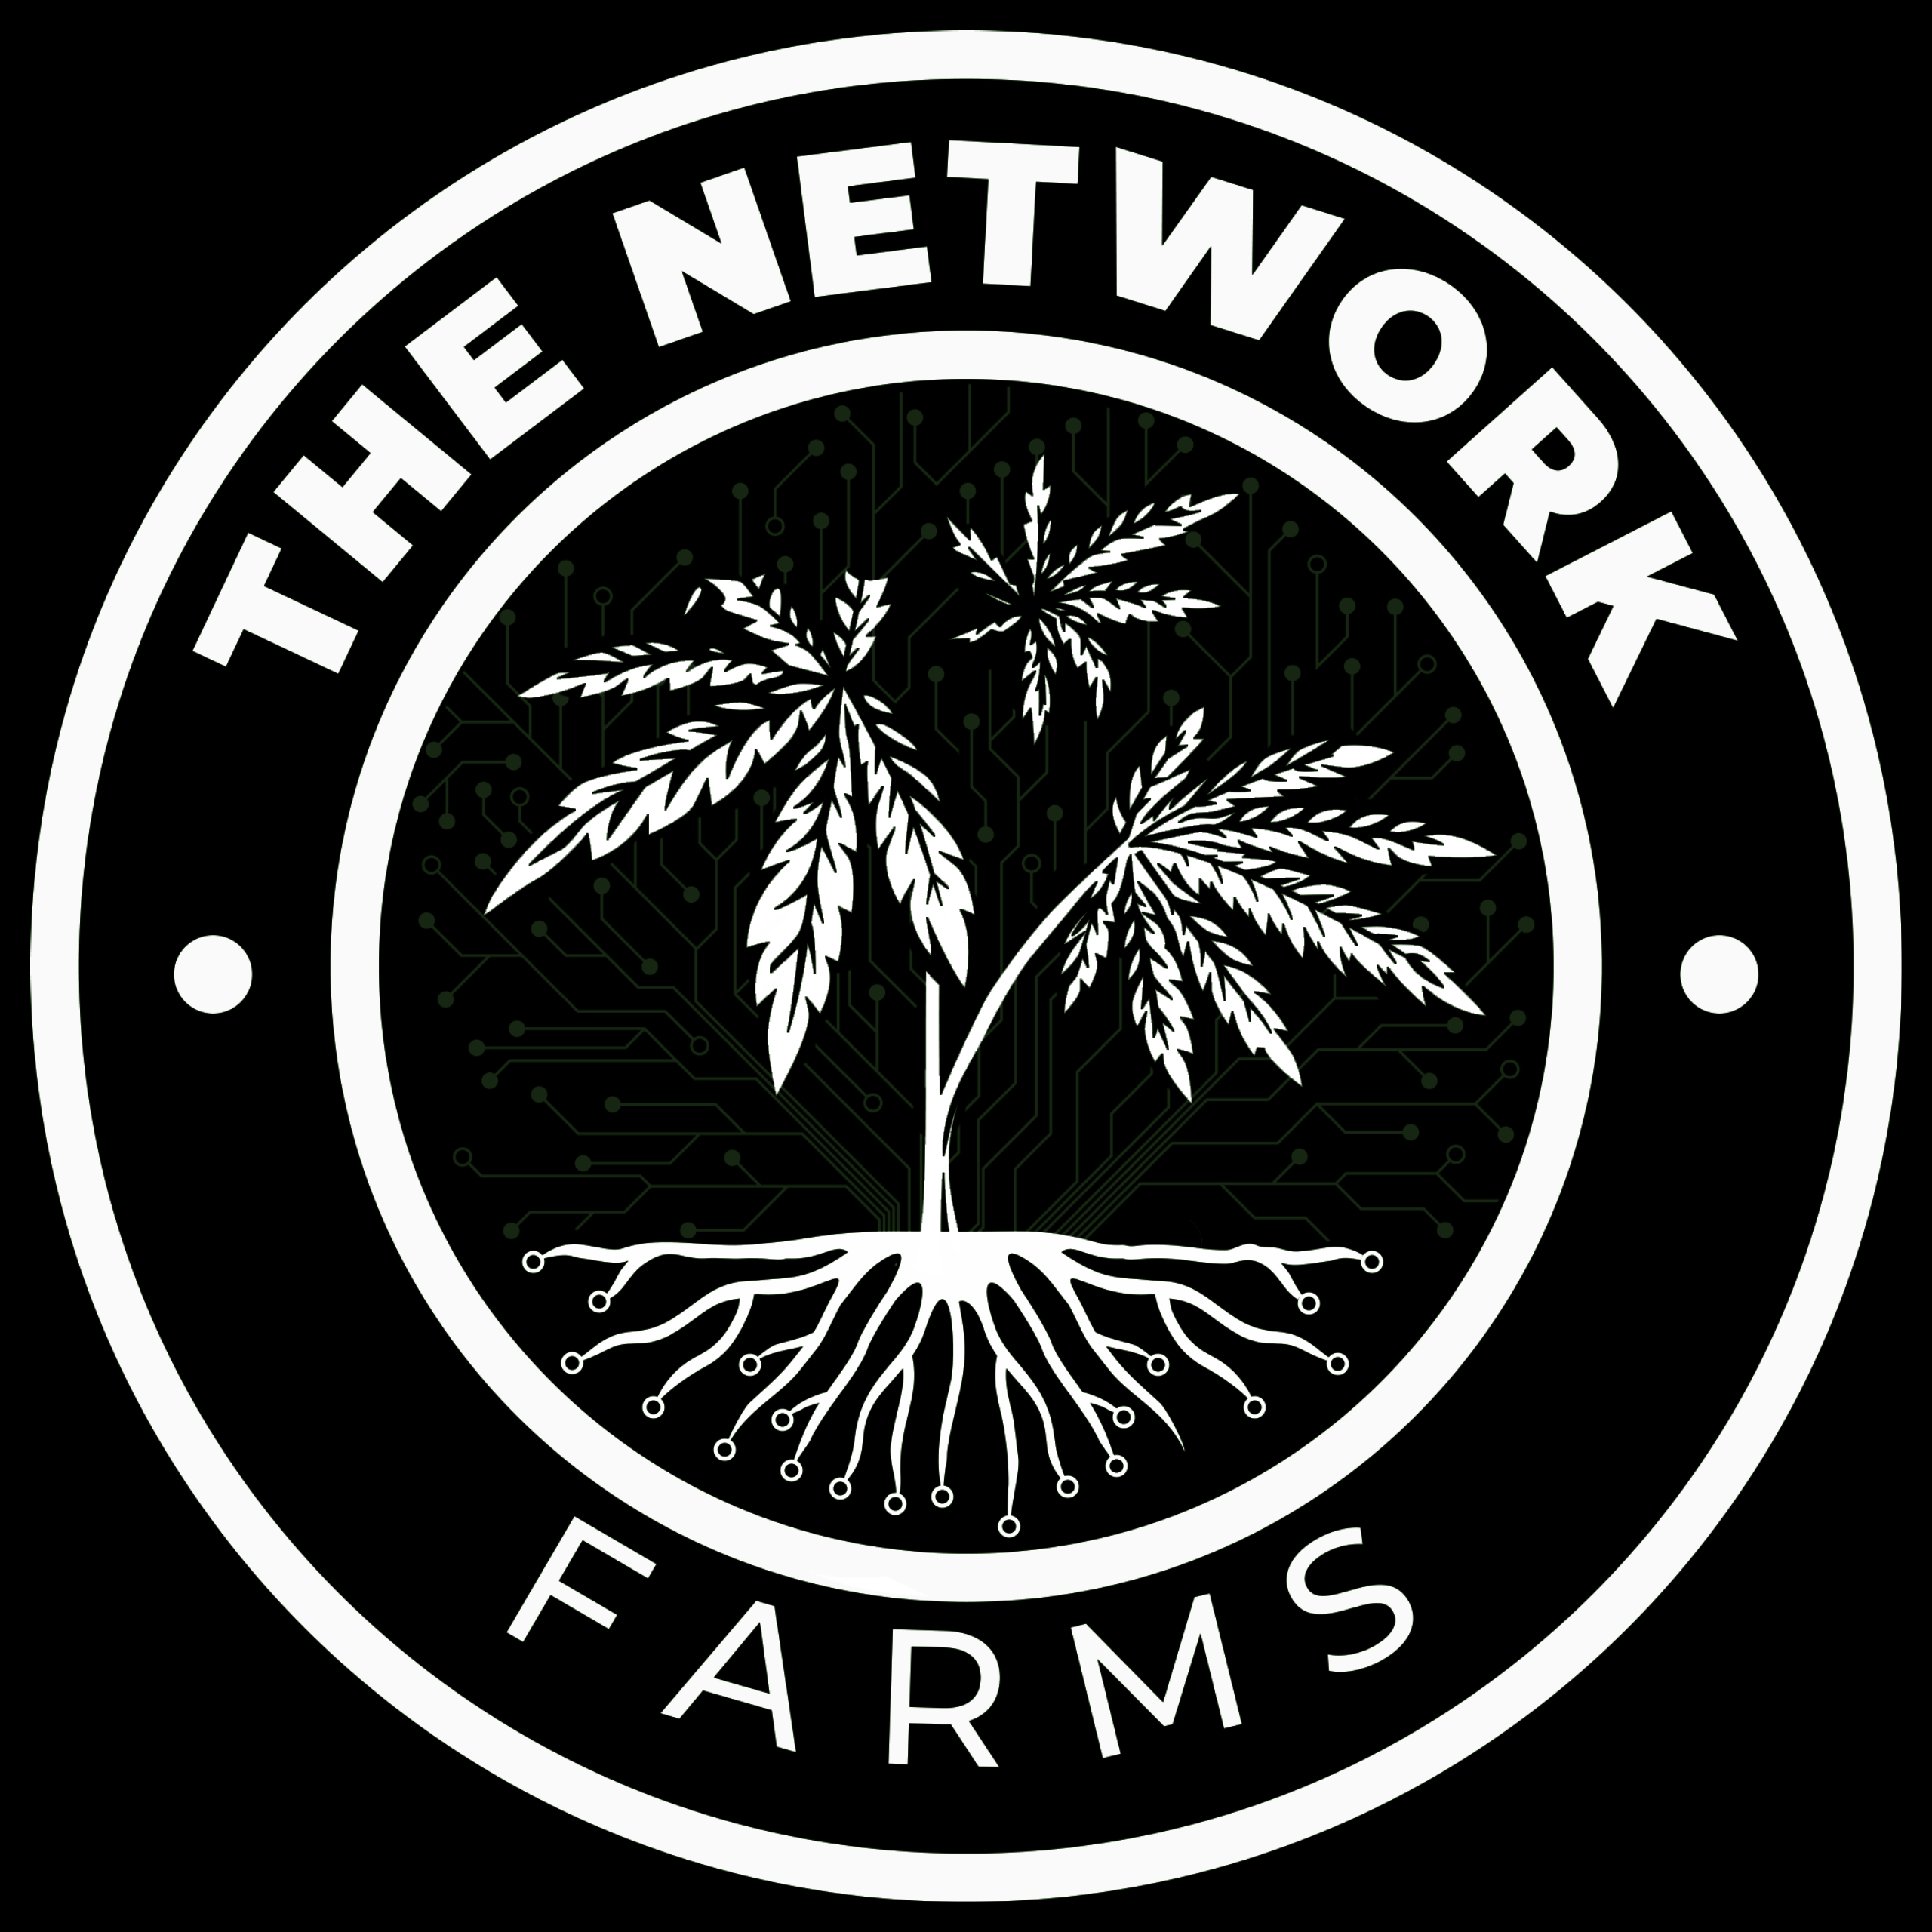 The Network Farms